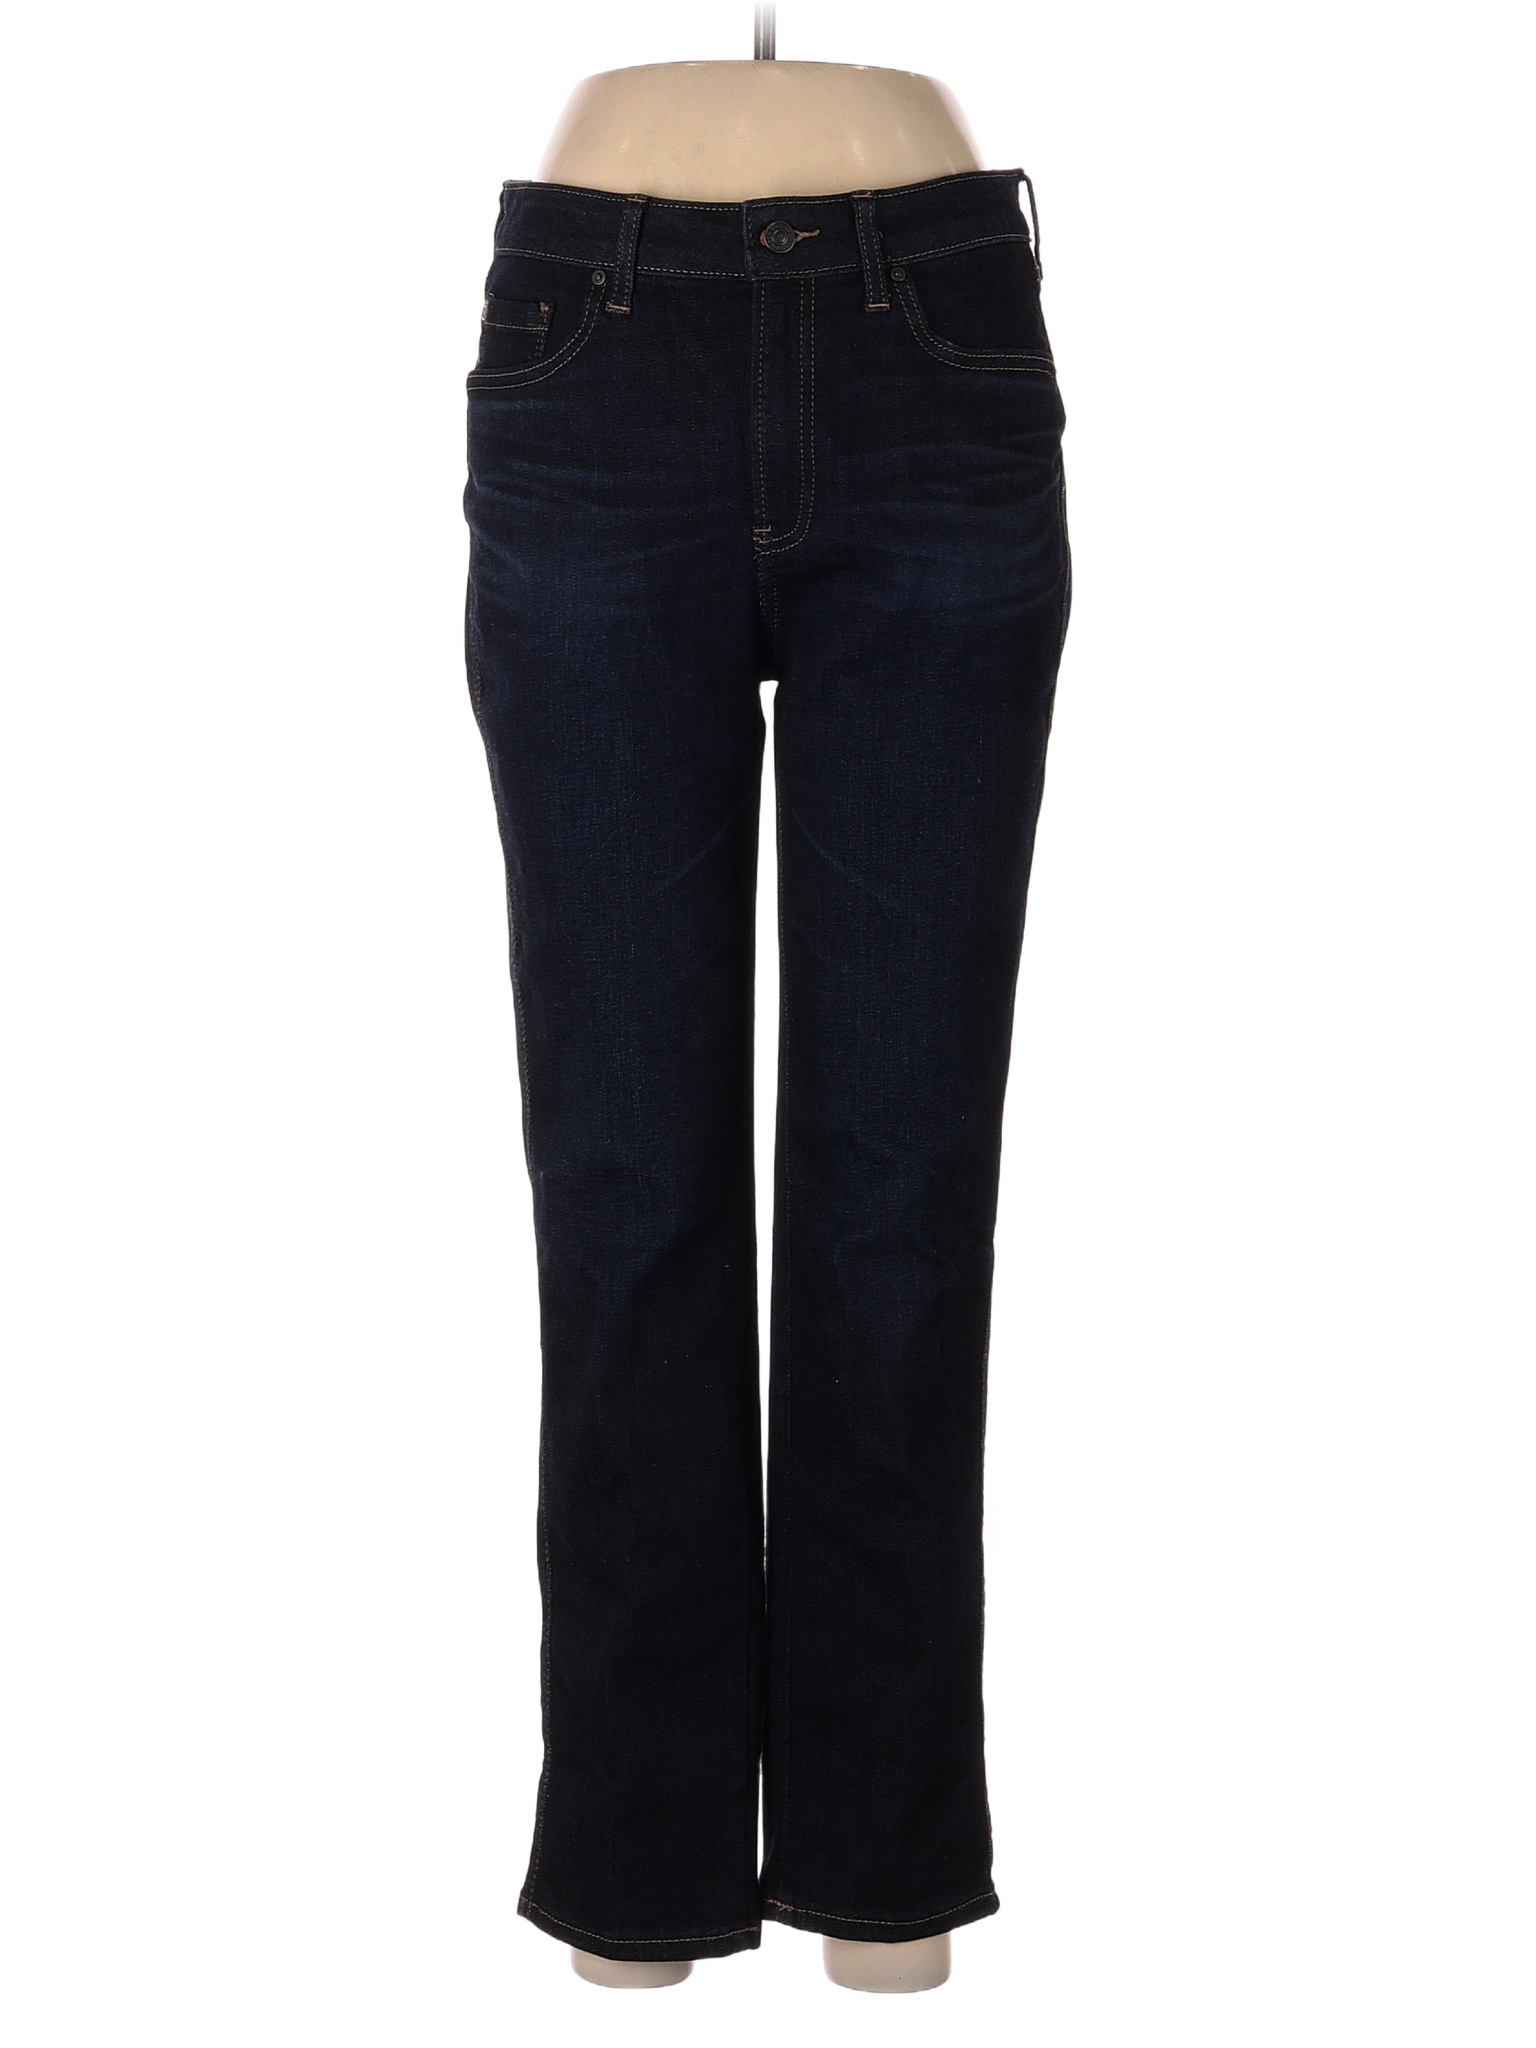 Chico's Solid Blue Jeans Size 8 - 79% off | thredUP